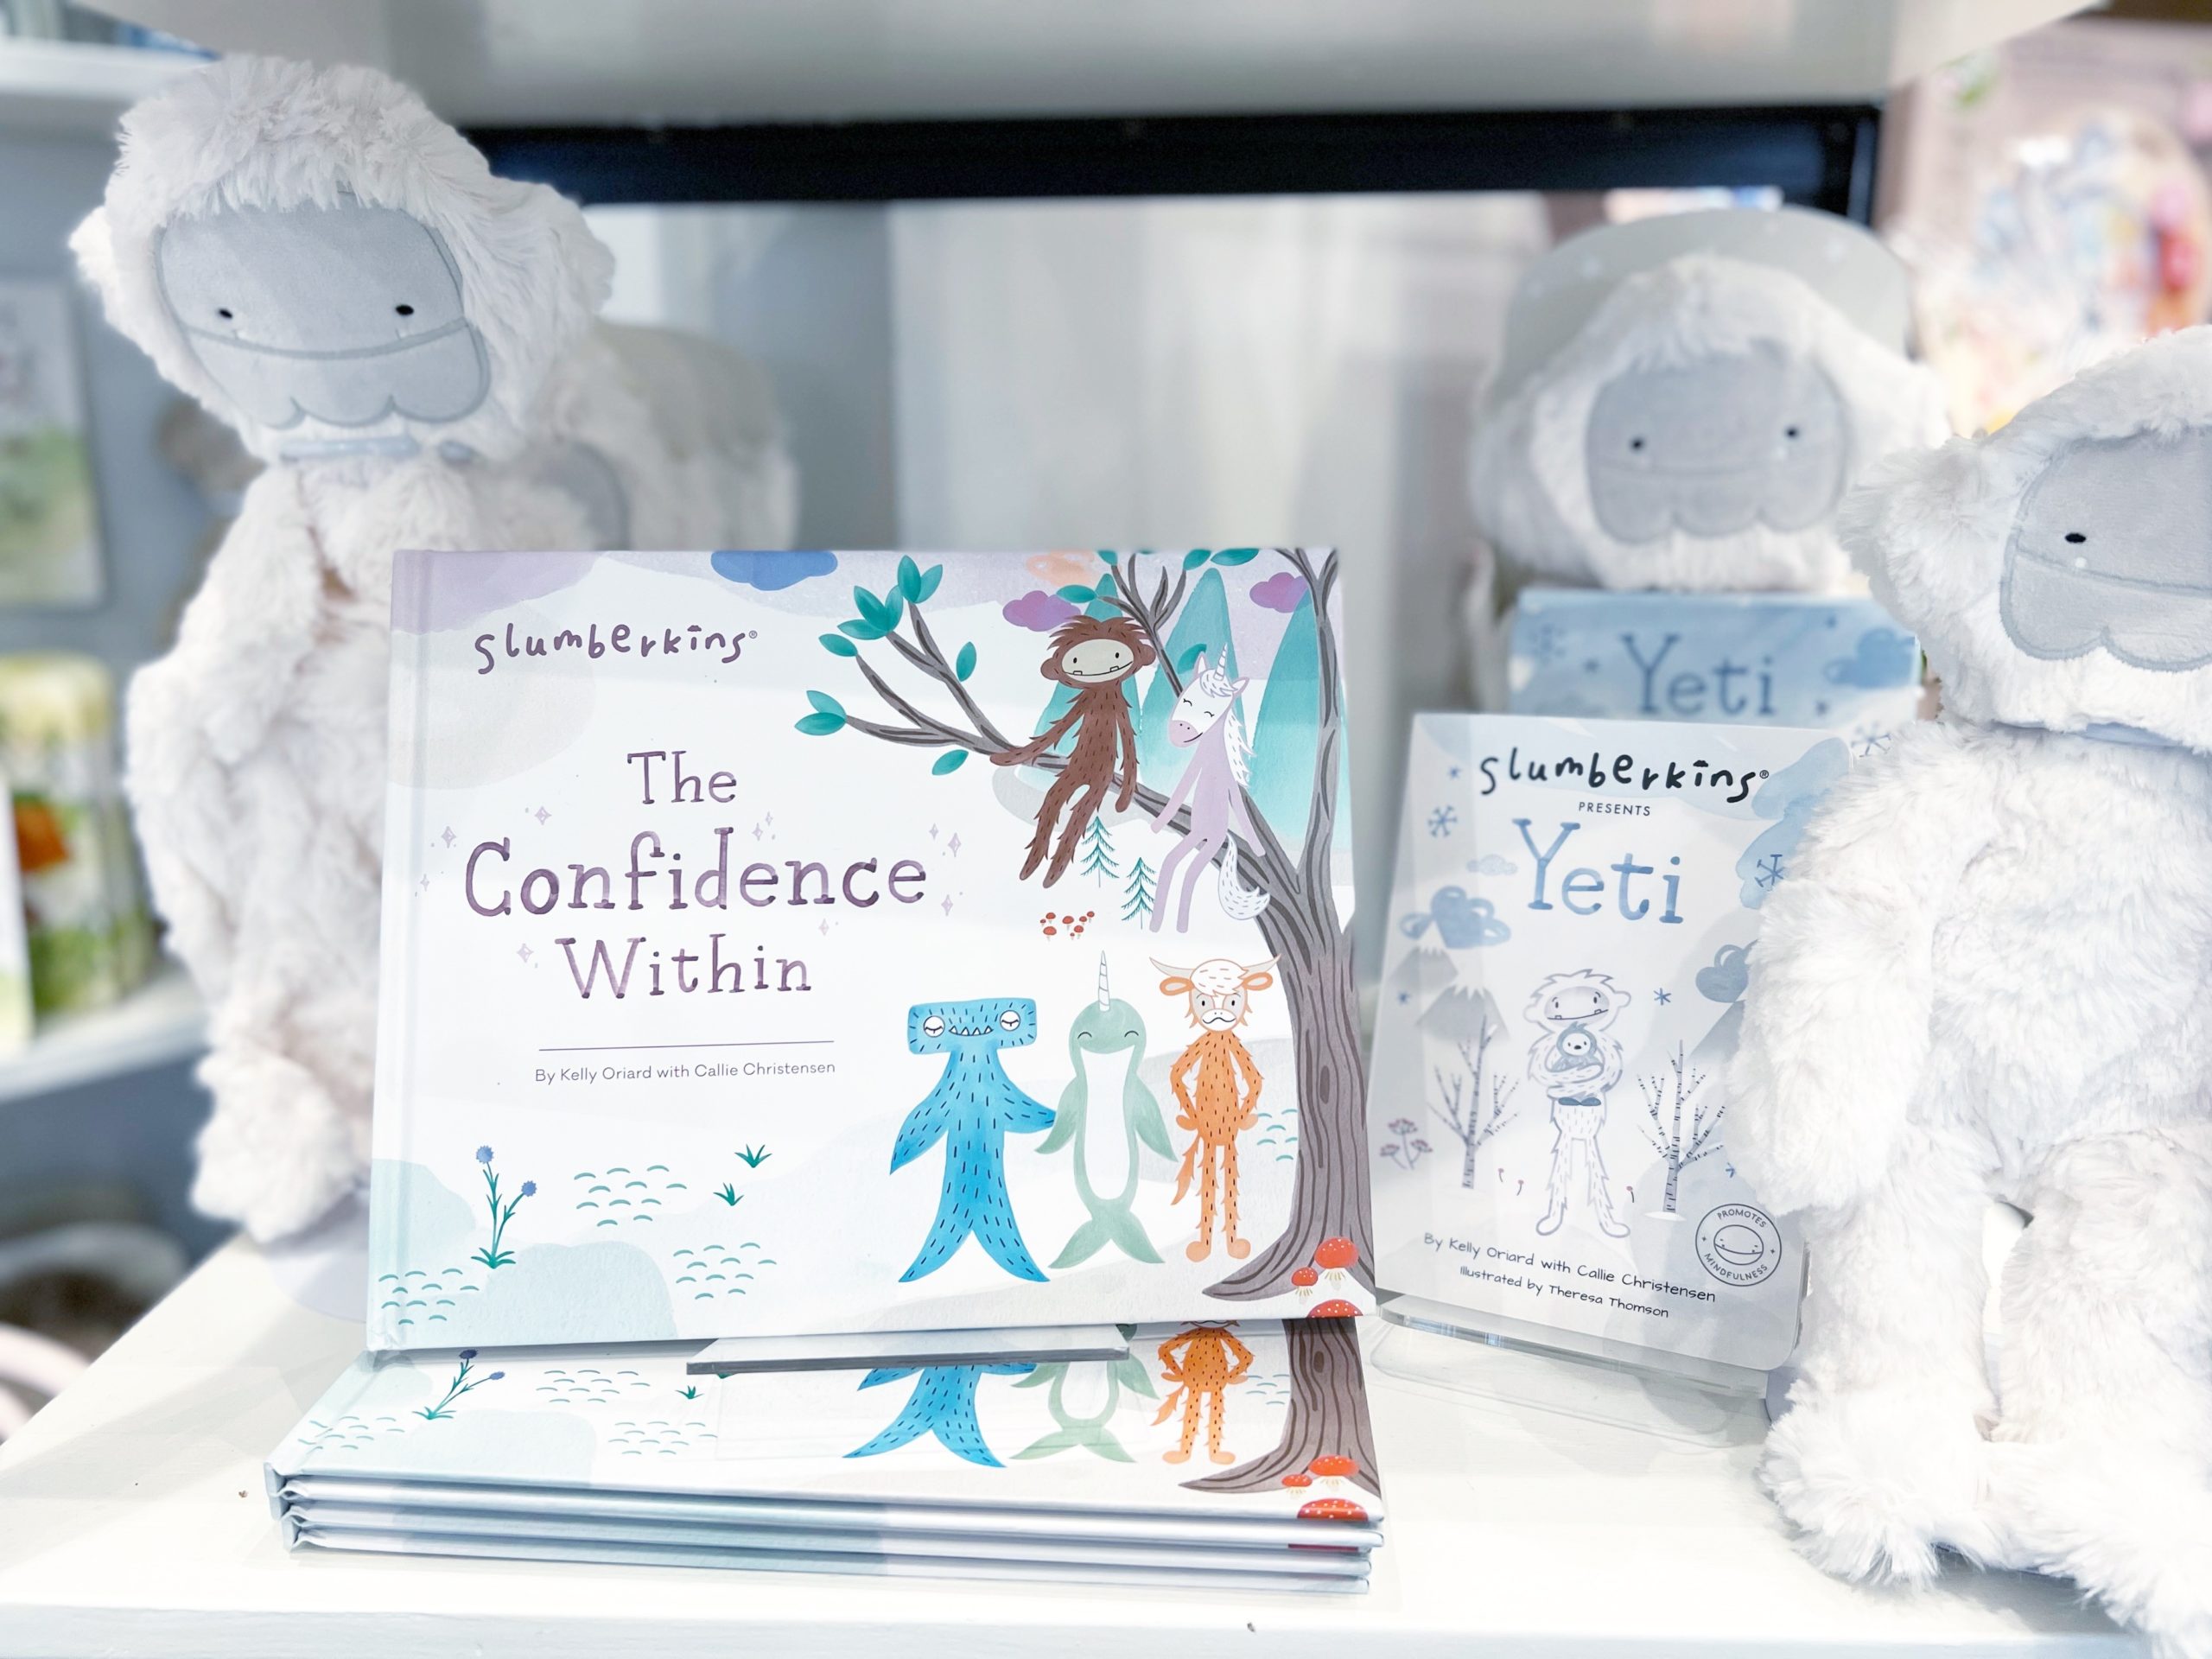 the slumberkins collection is one of several creatures meant to teach emotional lessons to children, including this yeti who is learning about the confidence within